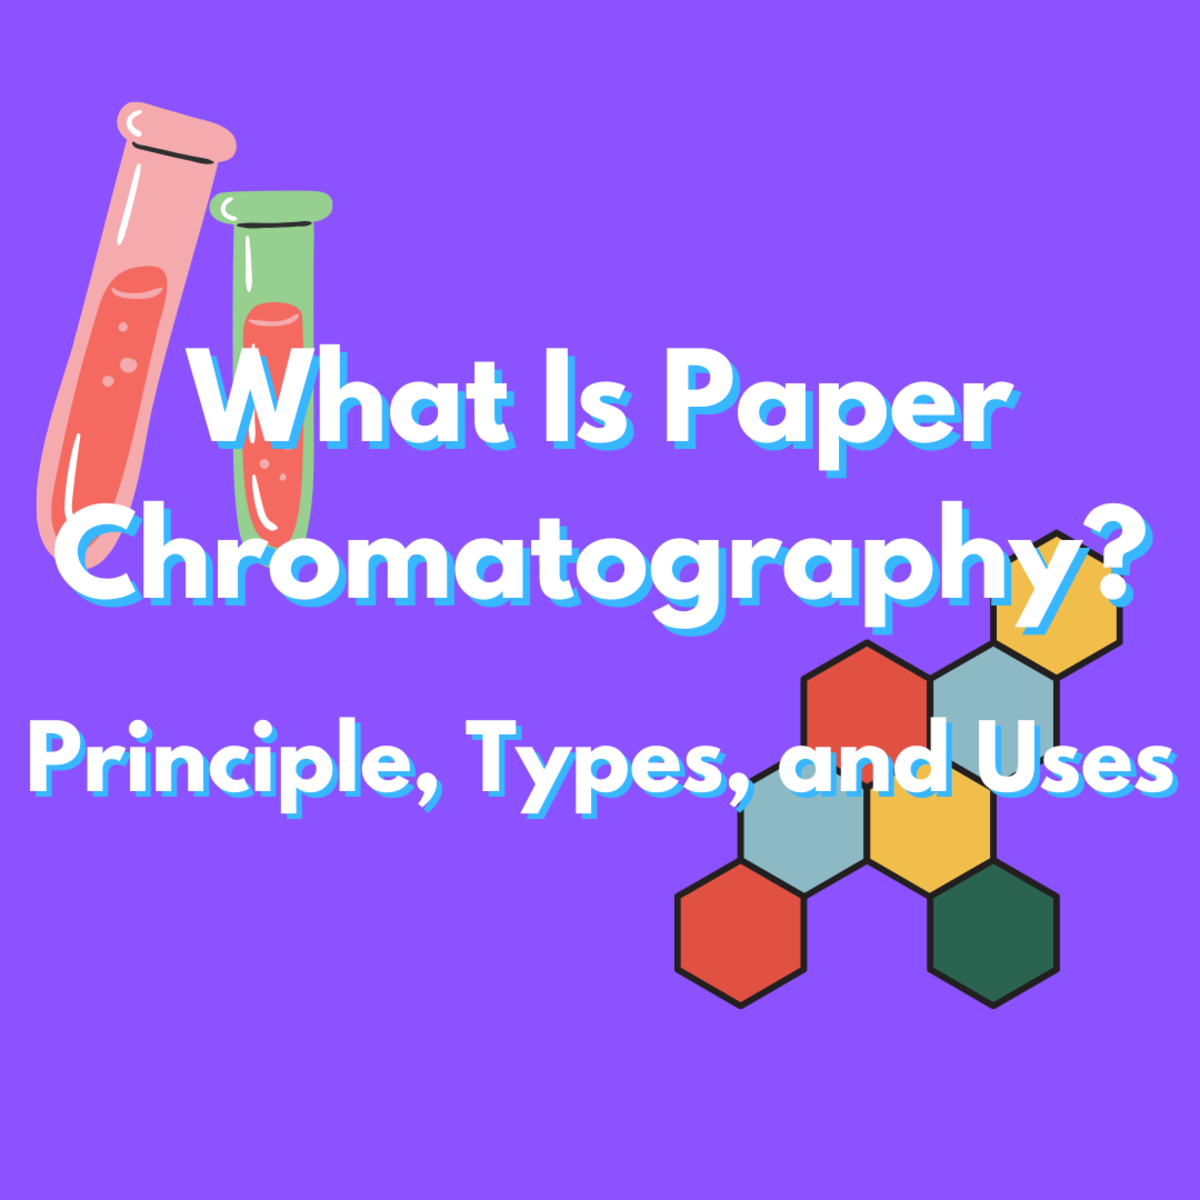 What Is Paper Chromatography: Principle, Types, and Uses